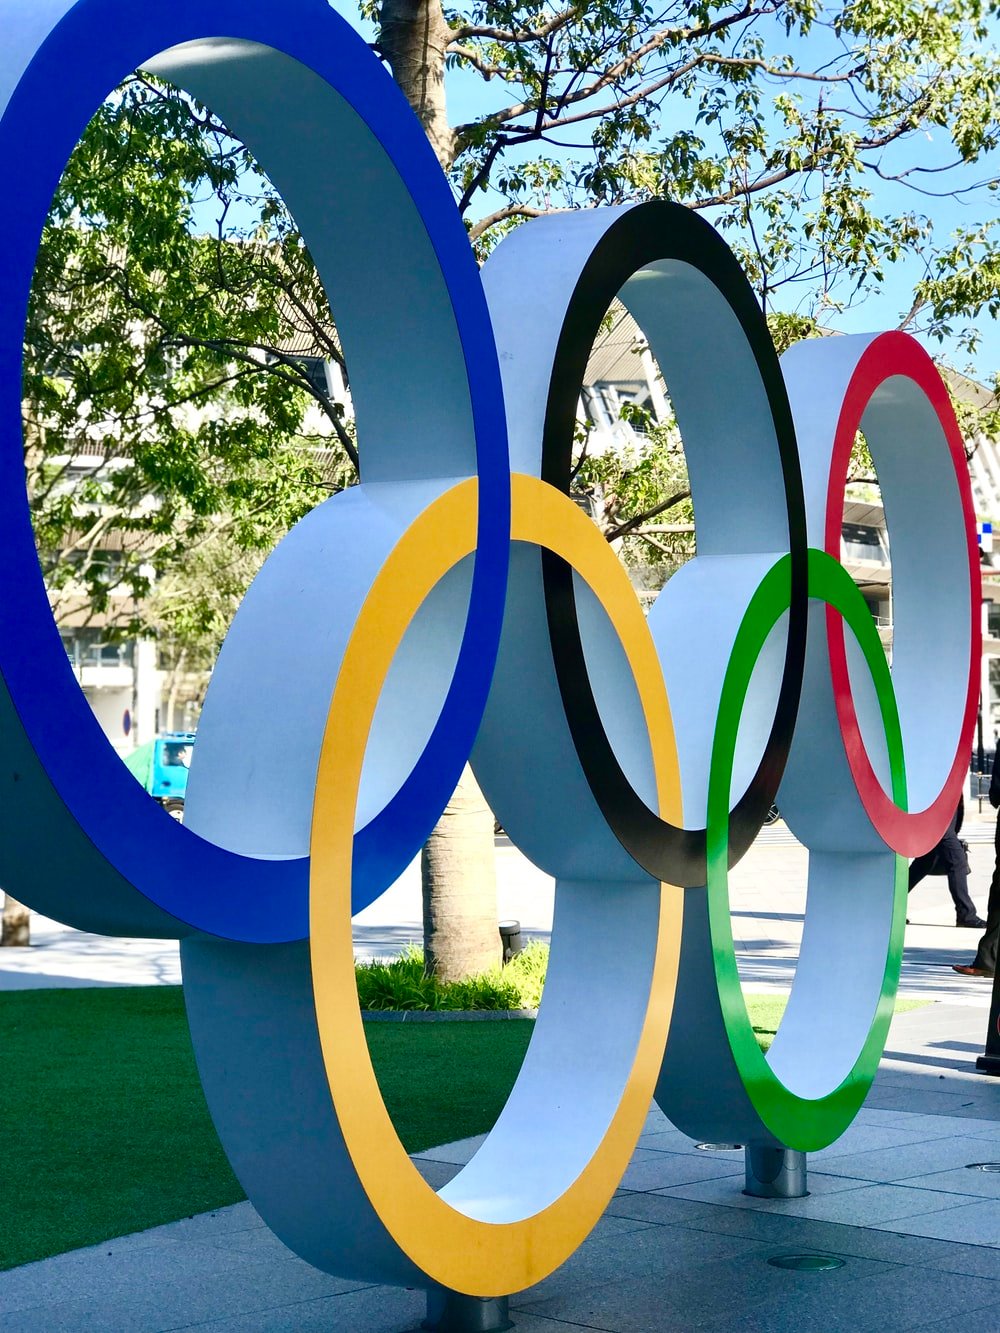 Olympics Picture. Download Free Image